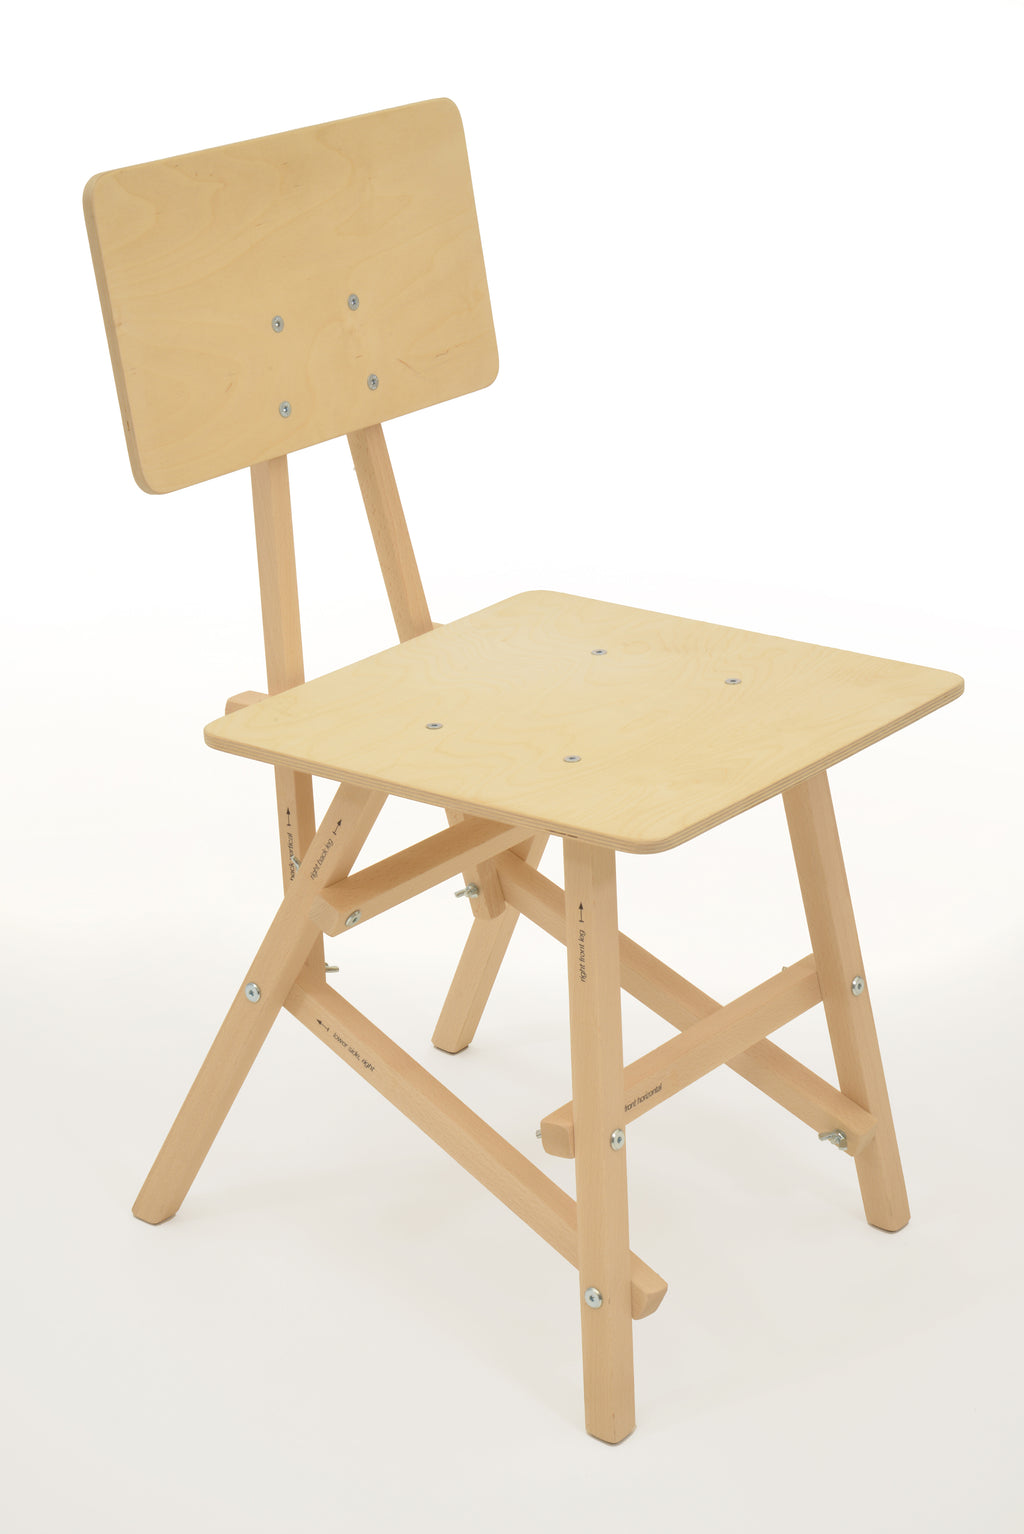 DIT Chair, wooden chair seen from the front. Self assembly, beech and plywood. Design by Tord Boontje.